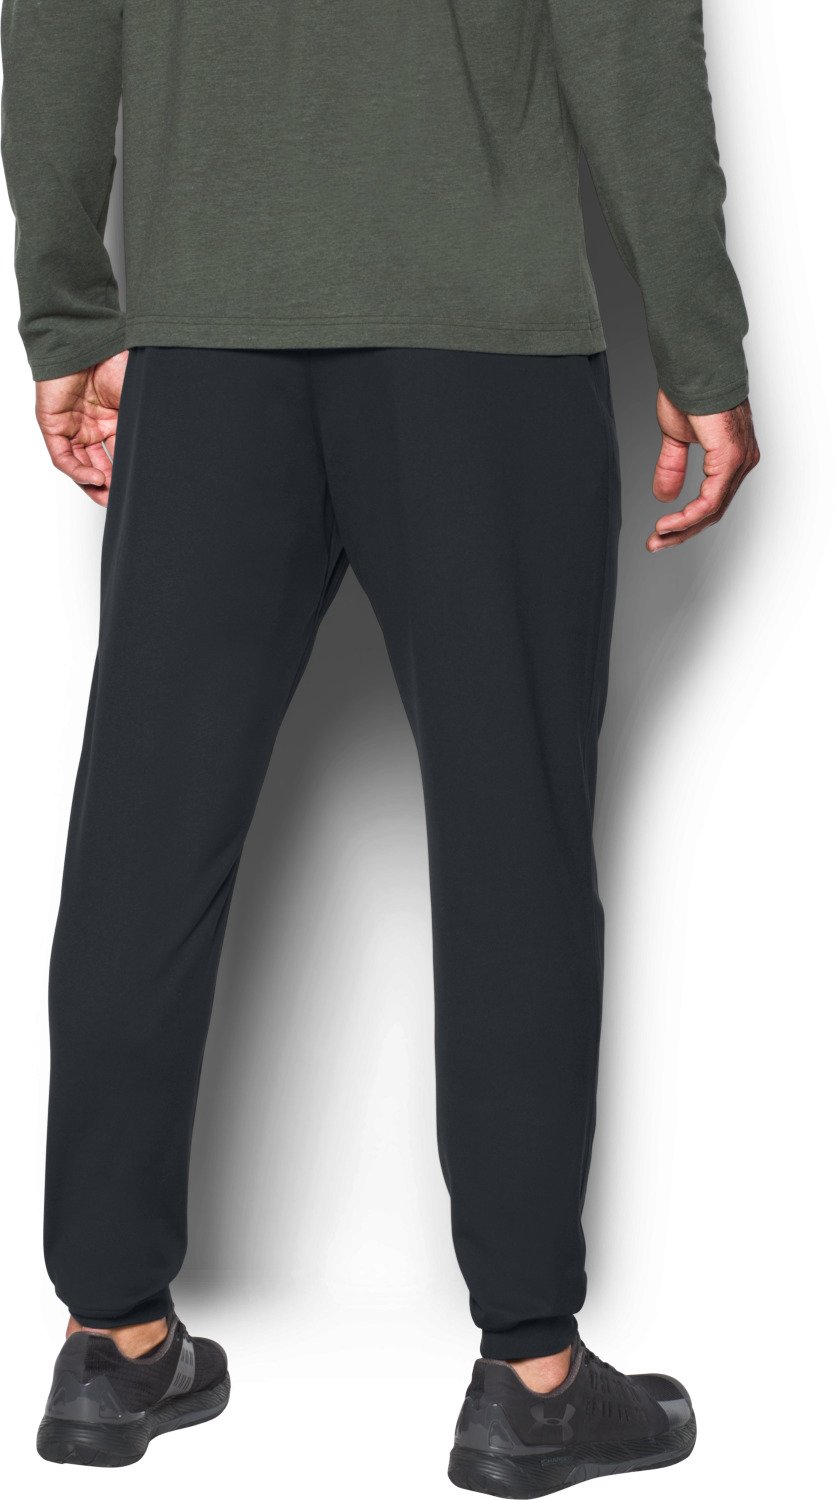 Under Armour Sportstyle Jogger Pant Black 1290261-001 - Free